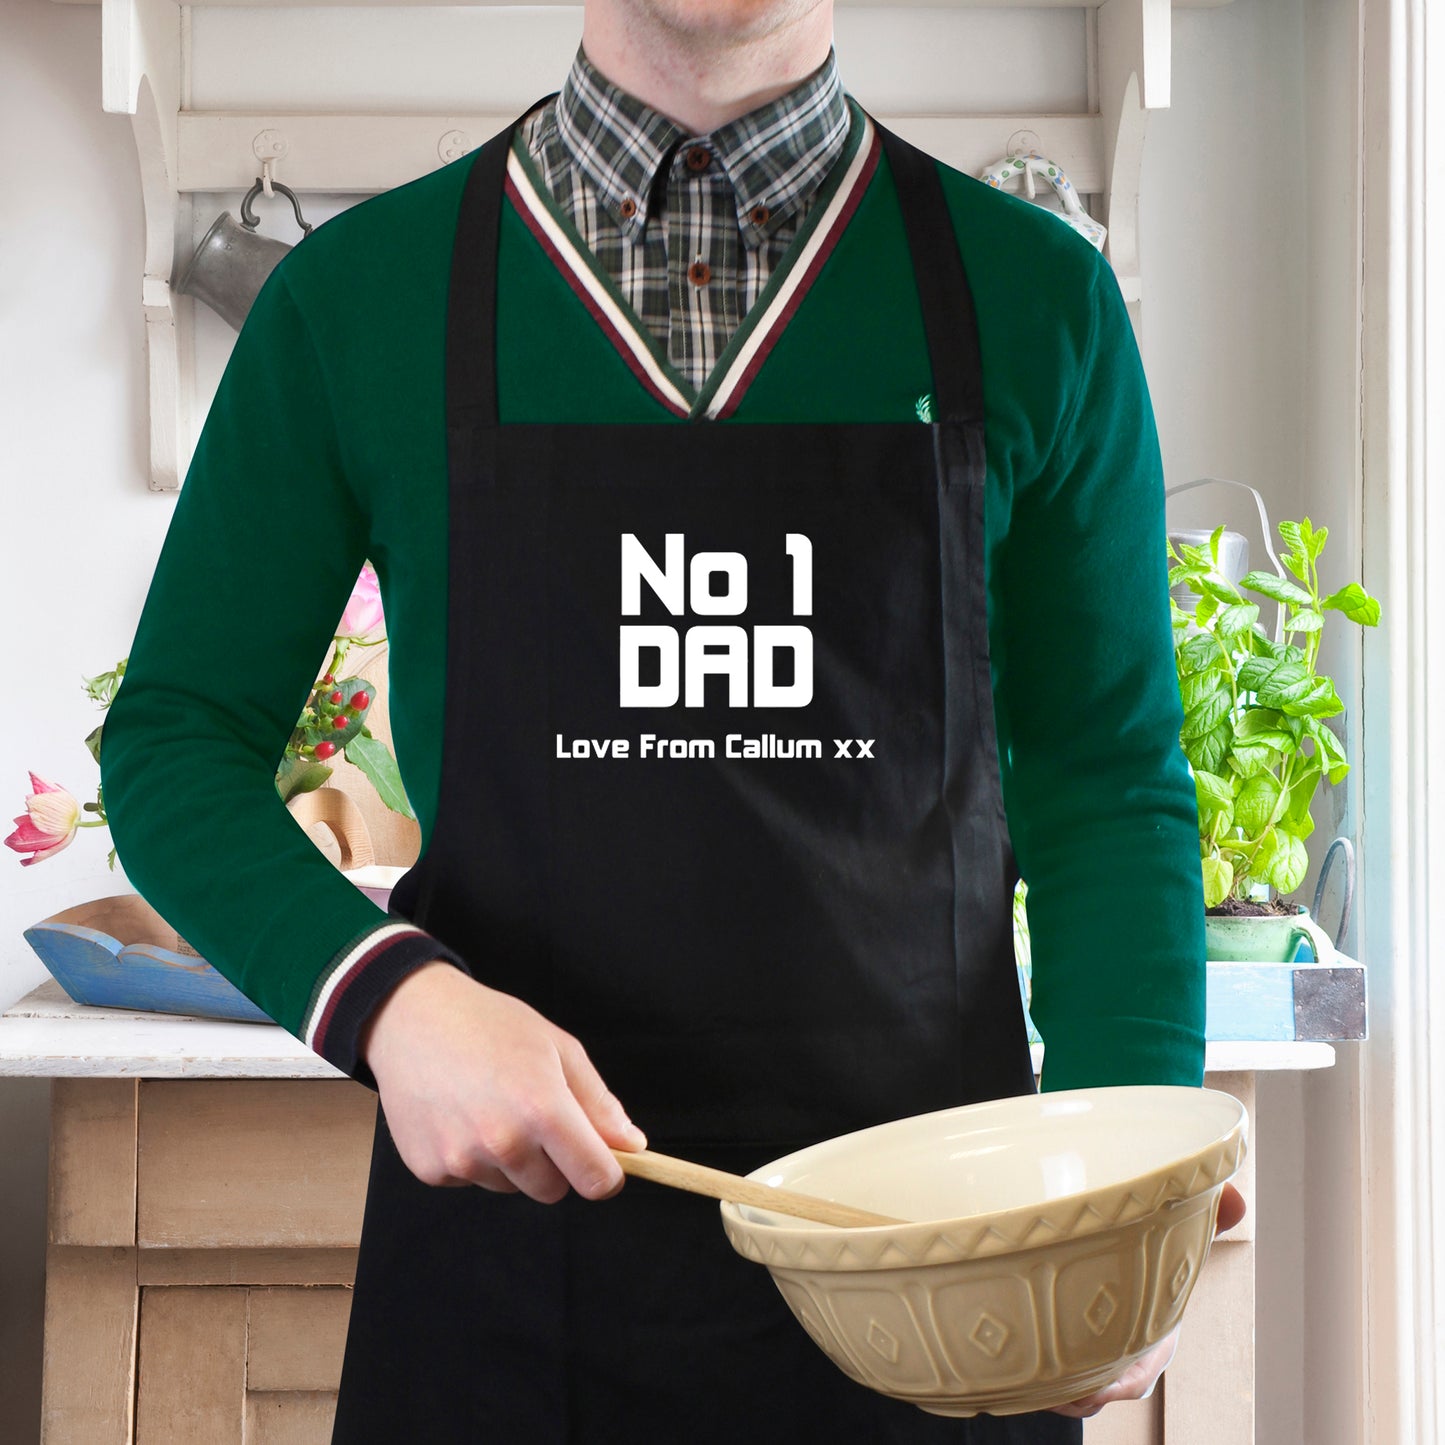 Personalised No1 Dad Apron - Personalise It!